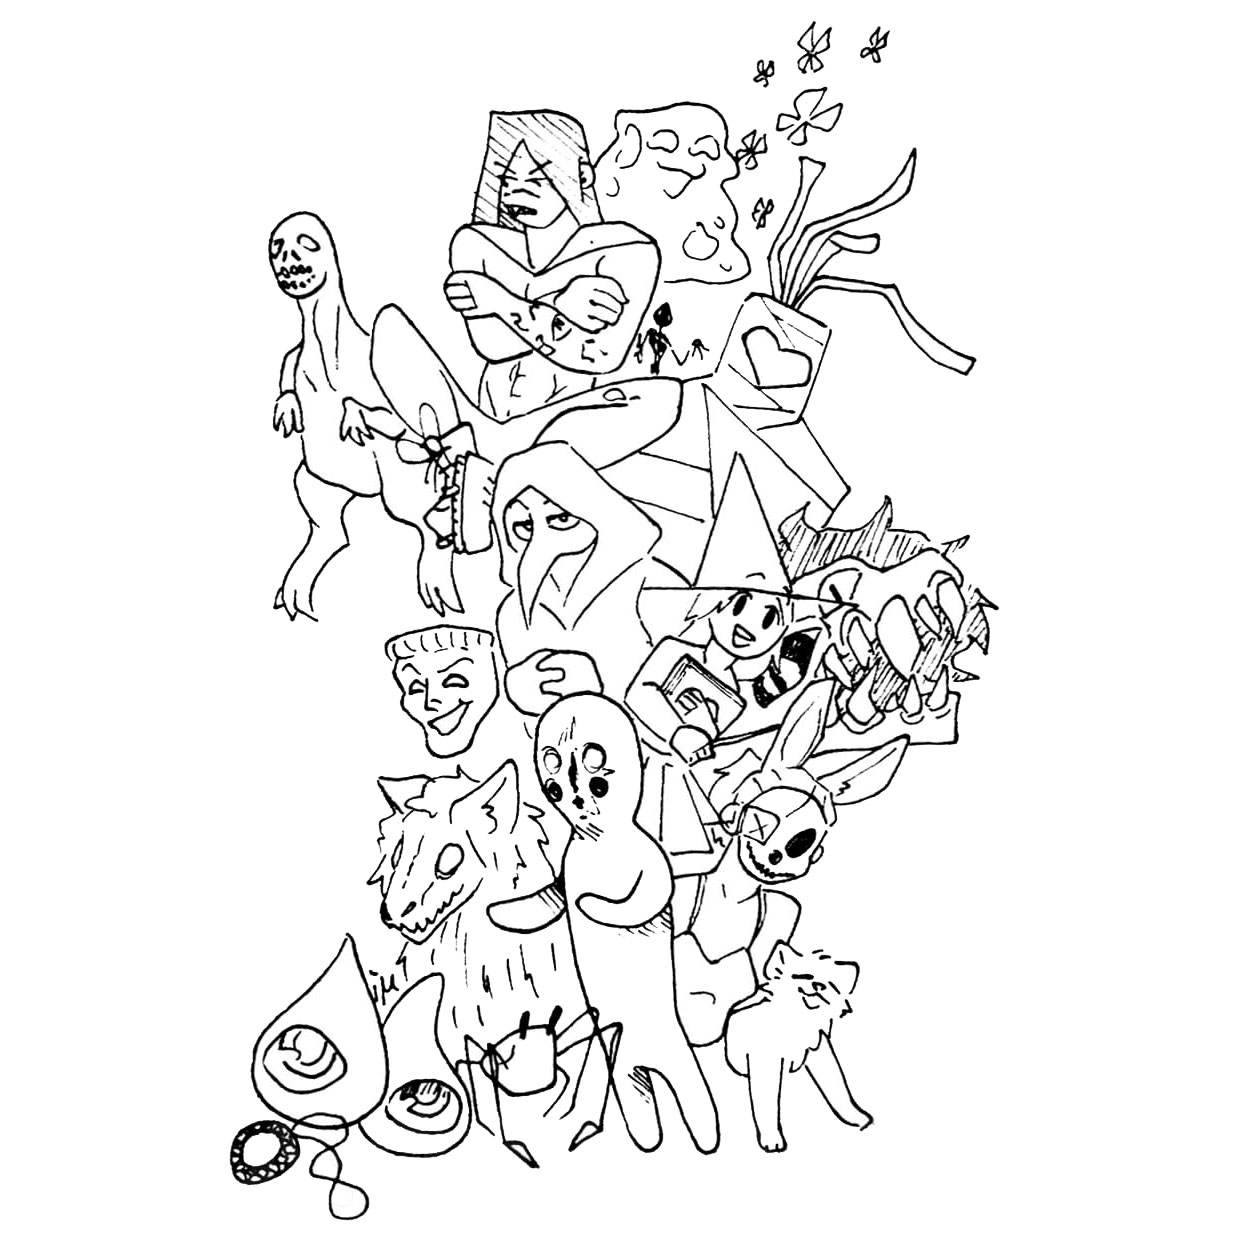 Scp-173 Coloring Pages with Monsters - XColorings.com